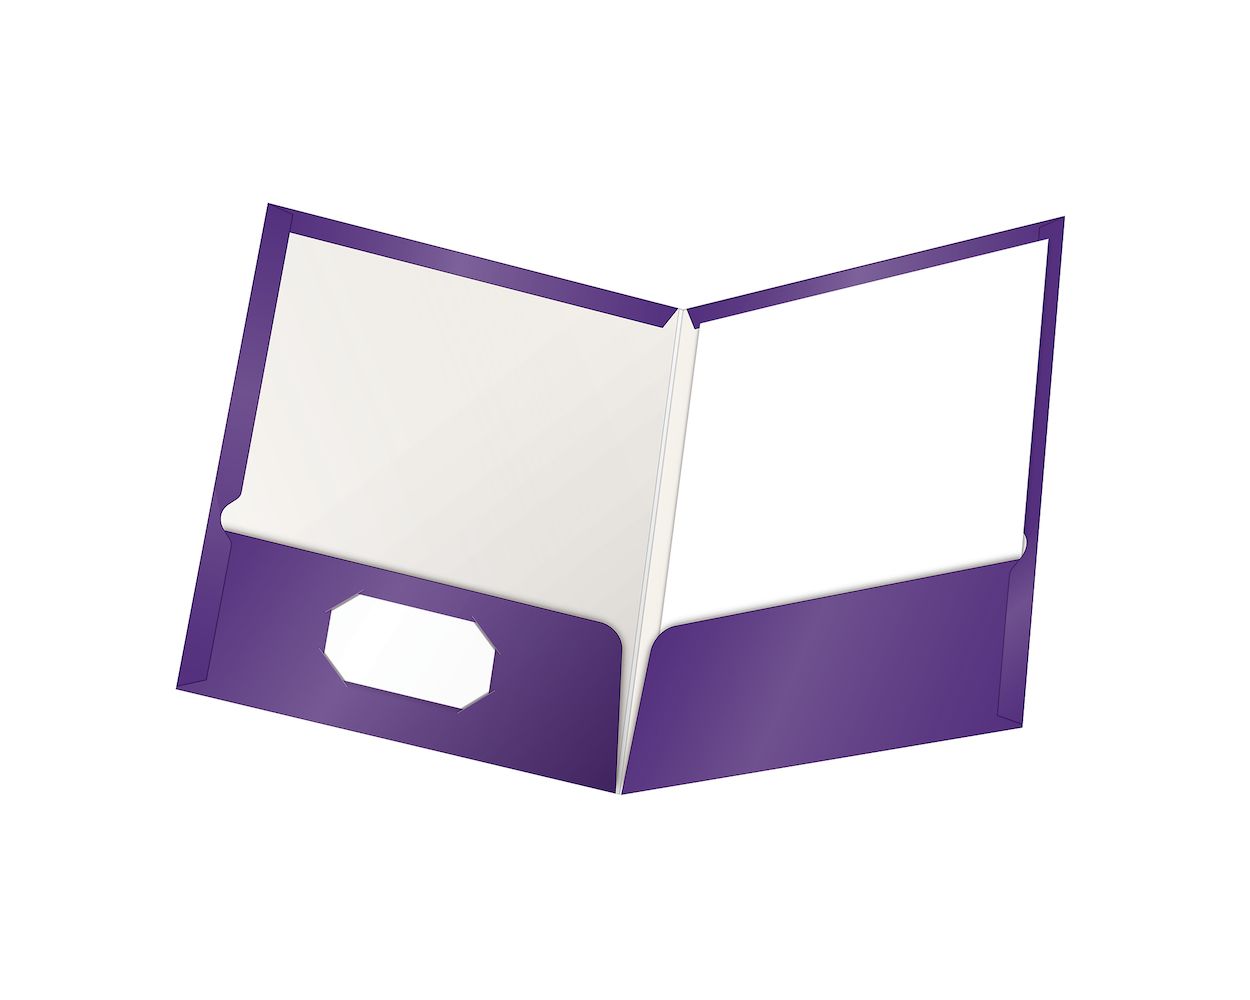 Textured Paper Letter Size Oxford Twin-Pocket Folders Holds 100 Sheets Purple 8-1/2 x 11 New 57514EE Box of 25 